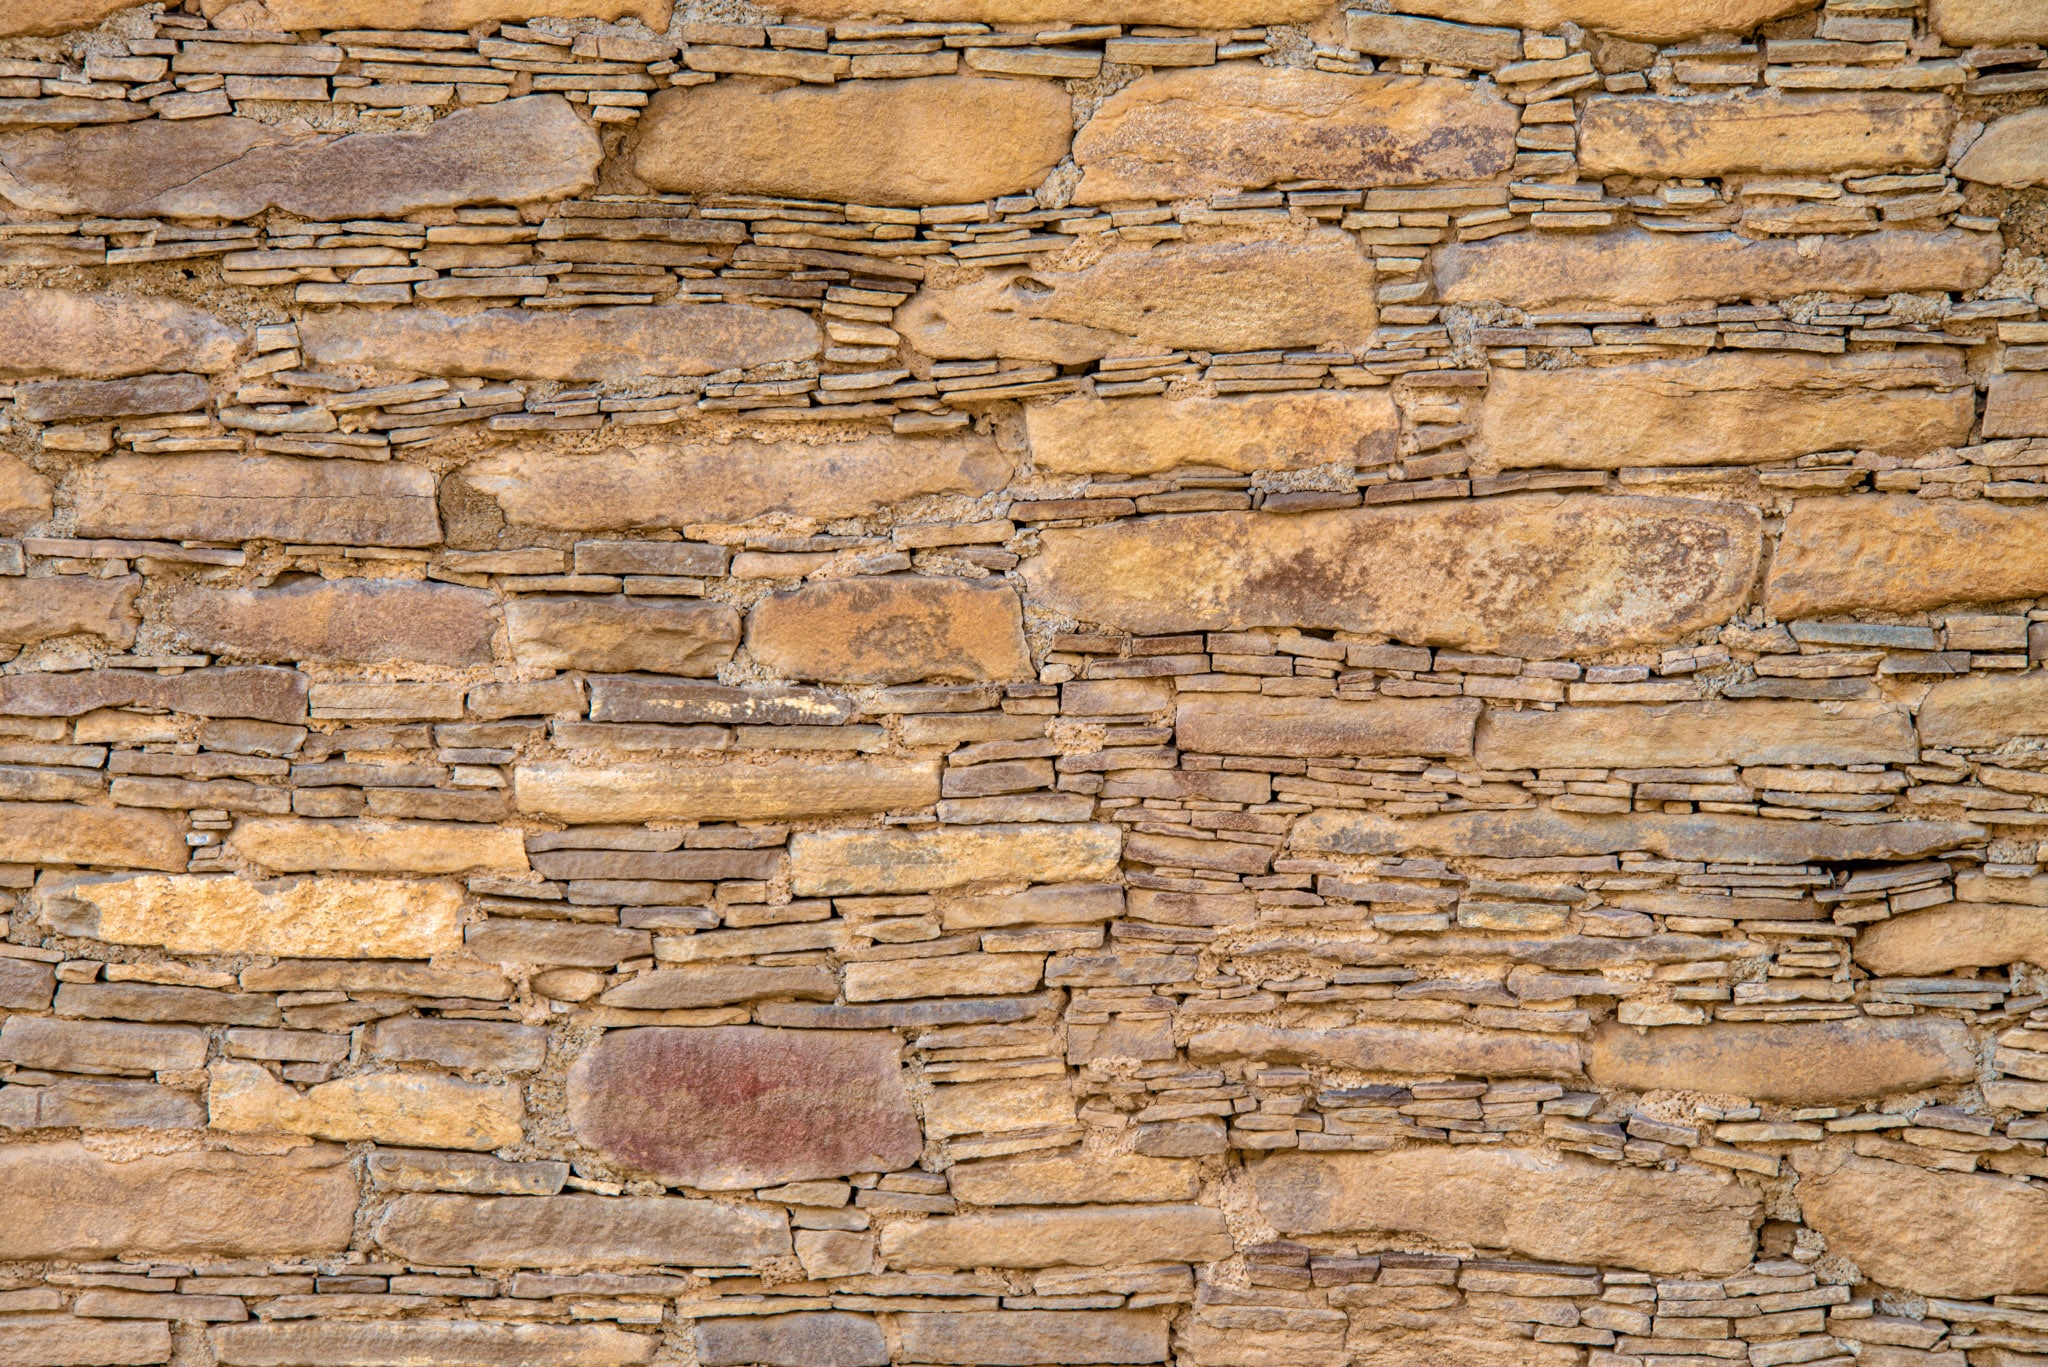 This is a detail of a wall at Chetro Ketl, a great house .5 miles east of Pueblo Bonito. Chetro Ketl has the largest surface area of any Chacoan great house. It is located in Chaco Canyon, New Mexico.